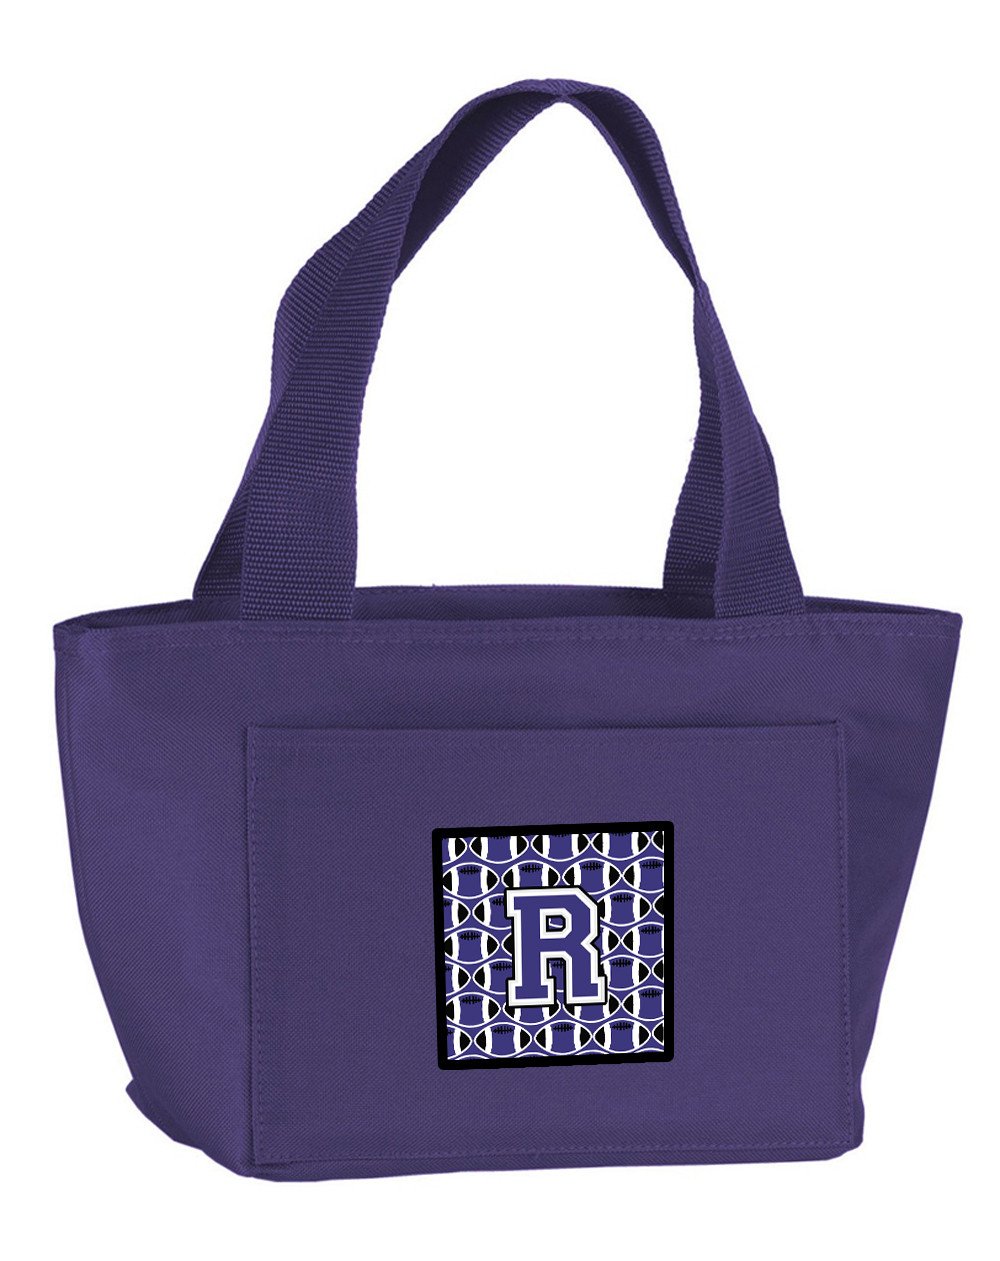 Letter R Football Purple and White Lunch Bag CJ1068-RPR-8808 by Caroline's Treasures